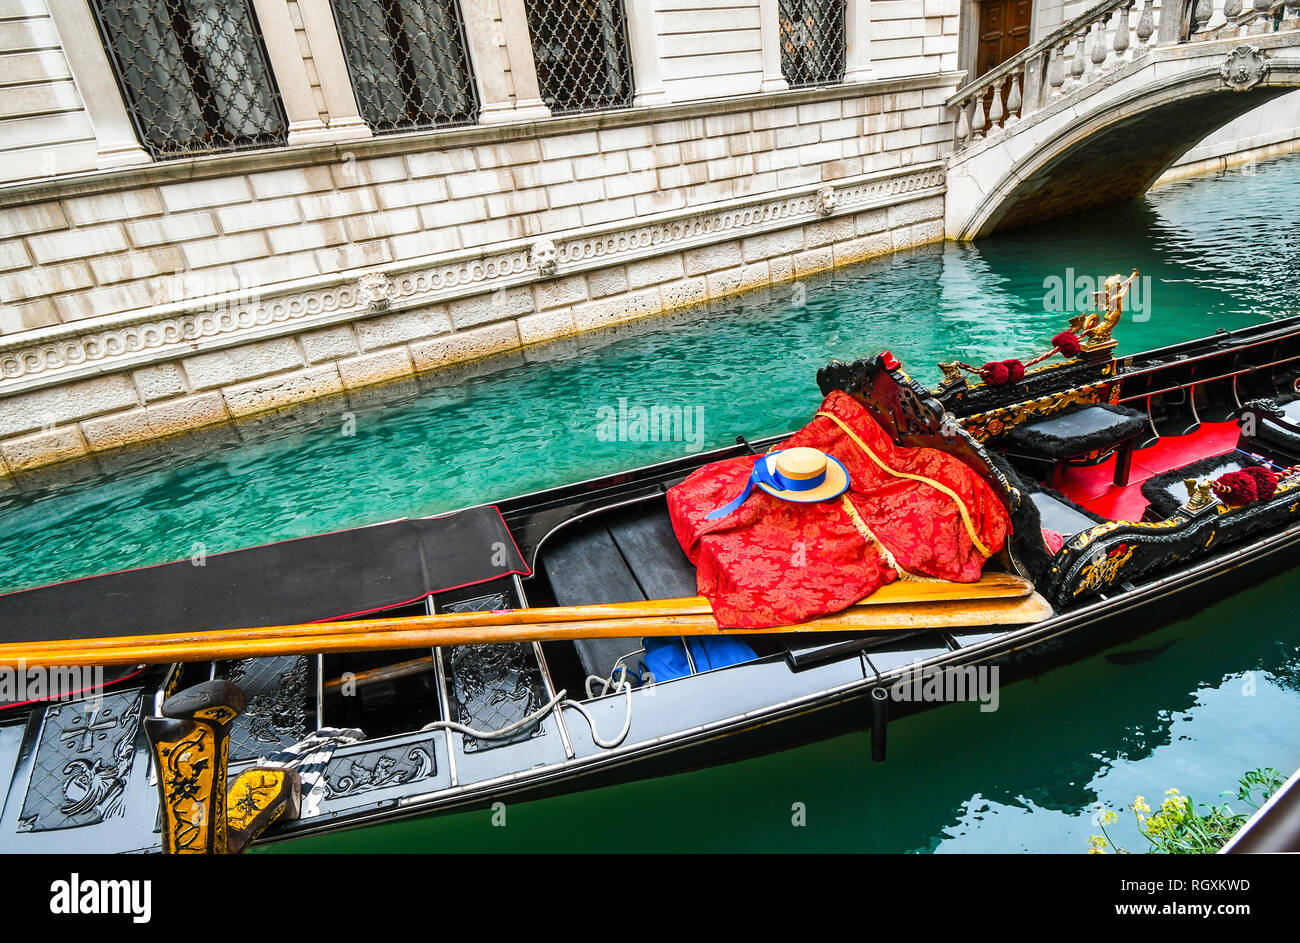 A fish swims under Venetian gondola with oars, gondolier hat, striped shirt and red blanket as it sits unoccupied in a colorful canal in Venice Italy Stock Photo